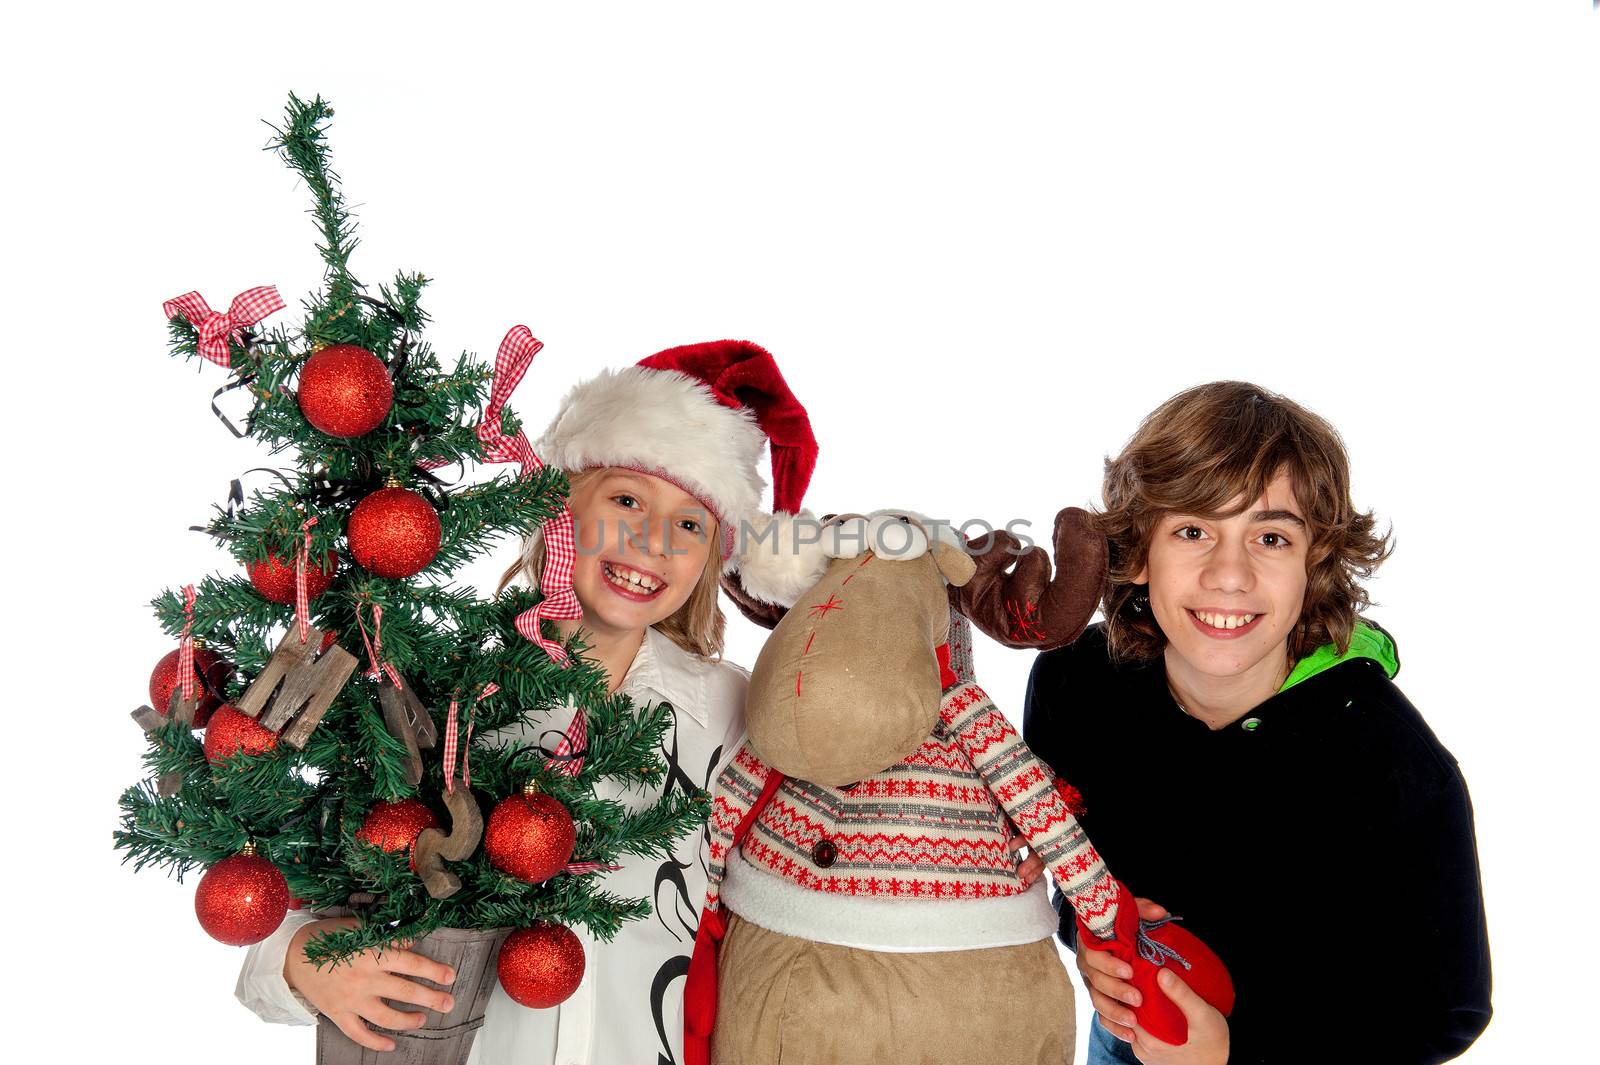 Two boys - one with a decorated christmas tree -and a Christmas Reindeer.